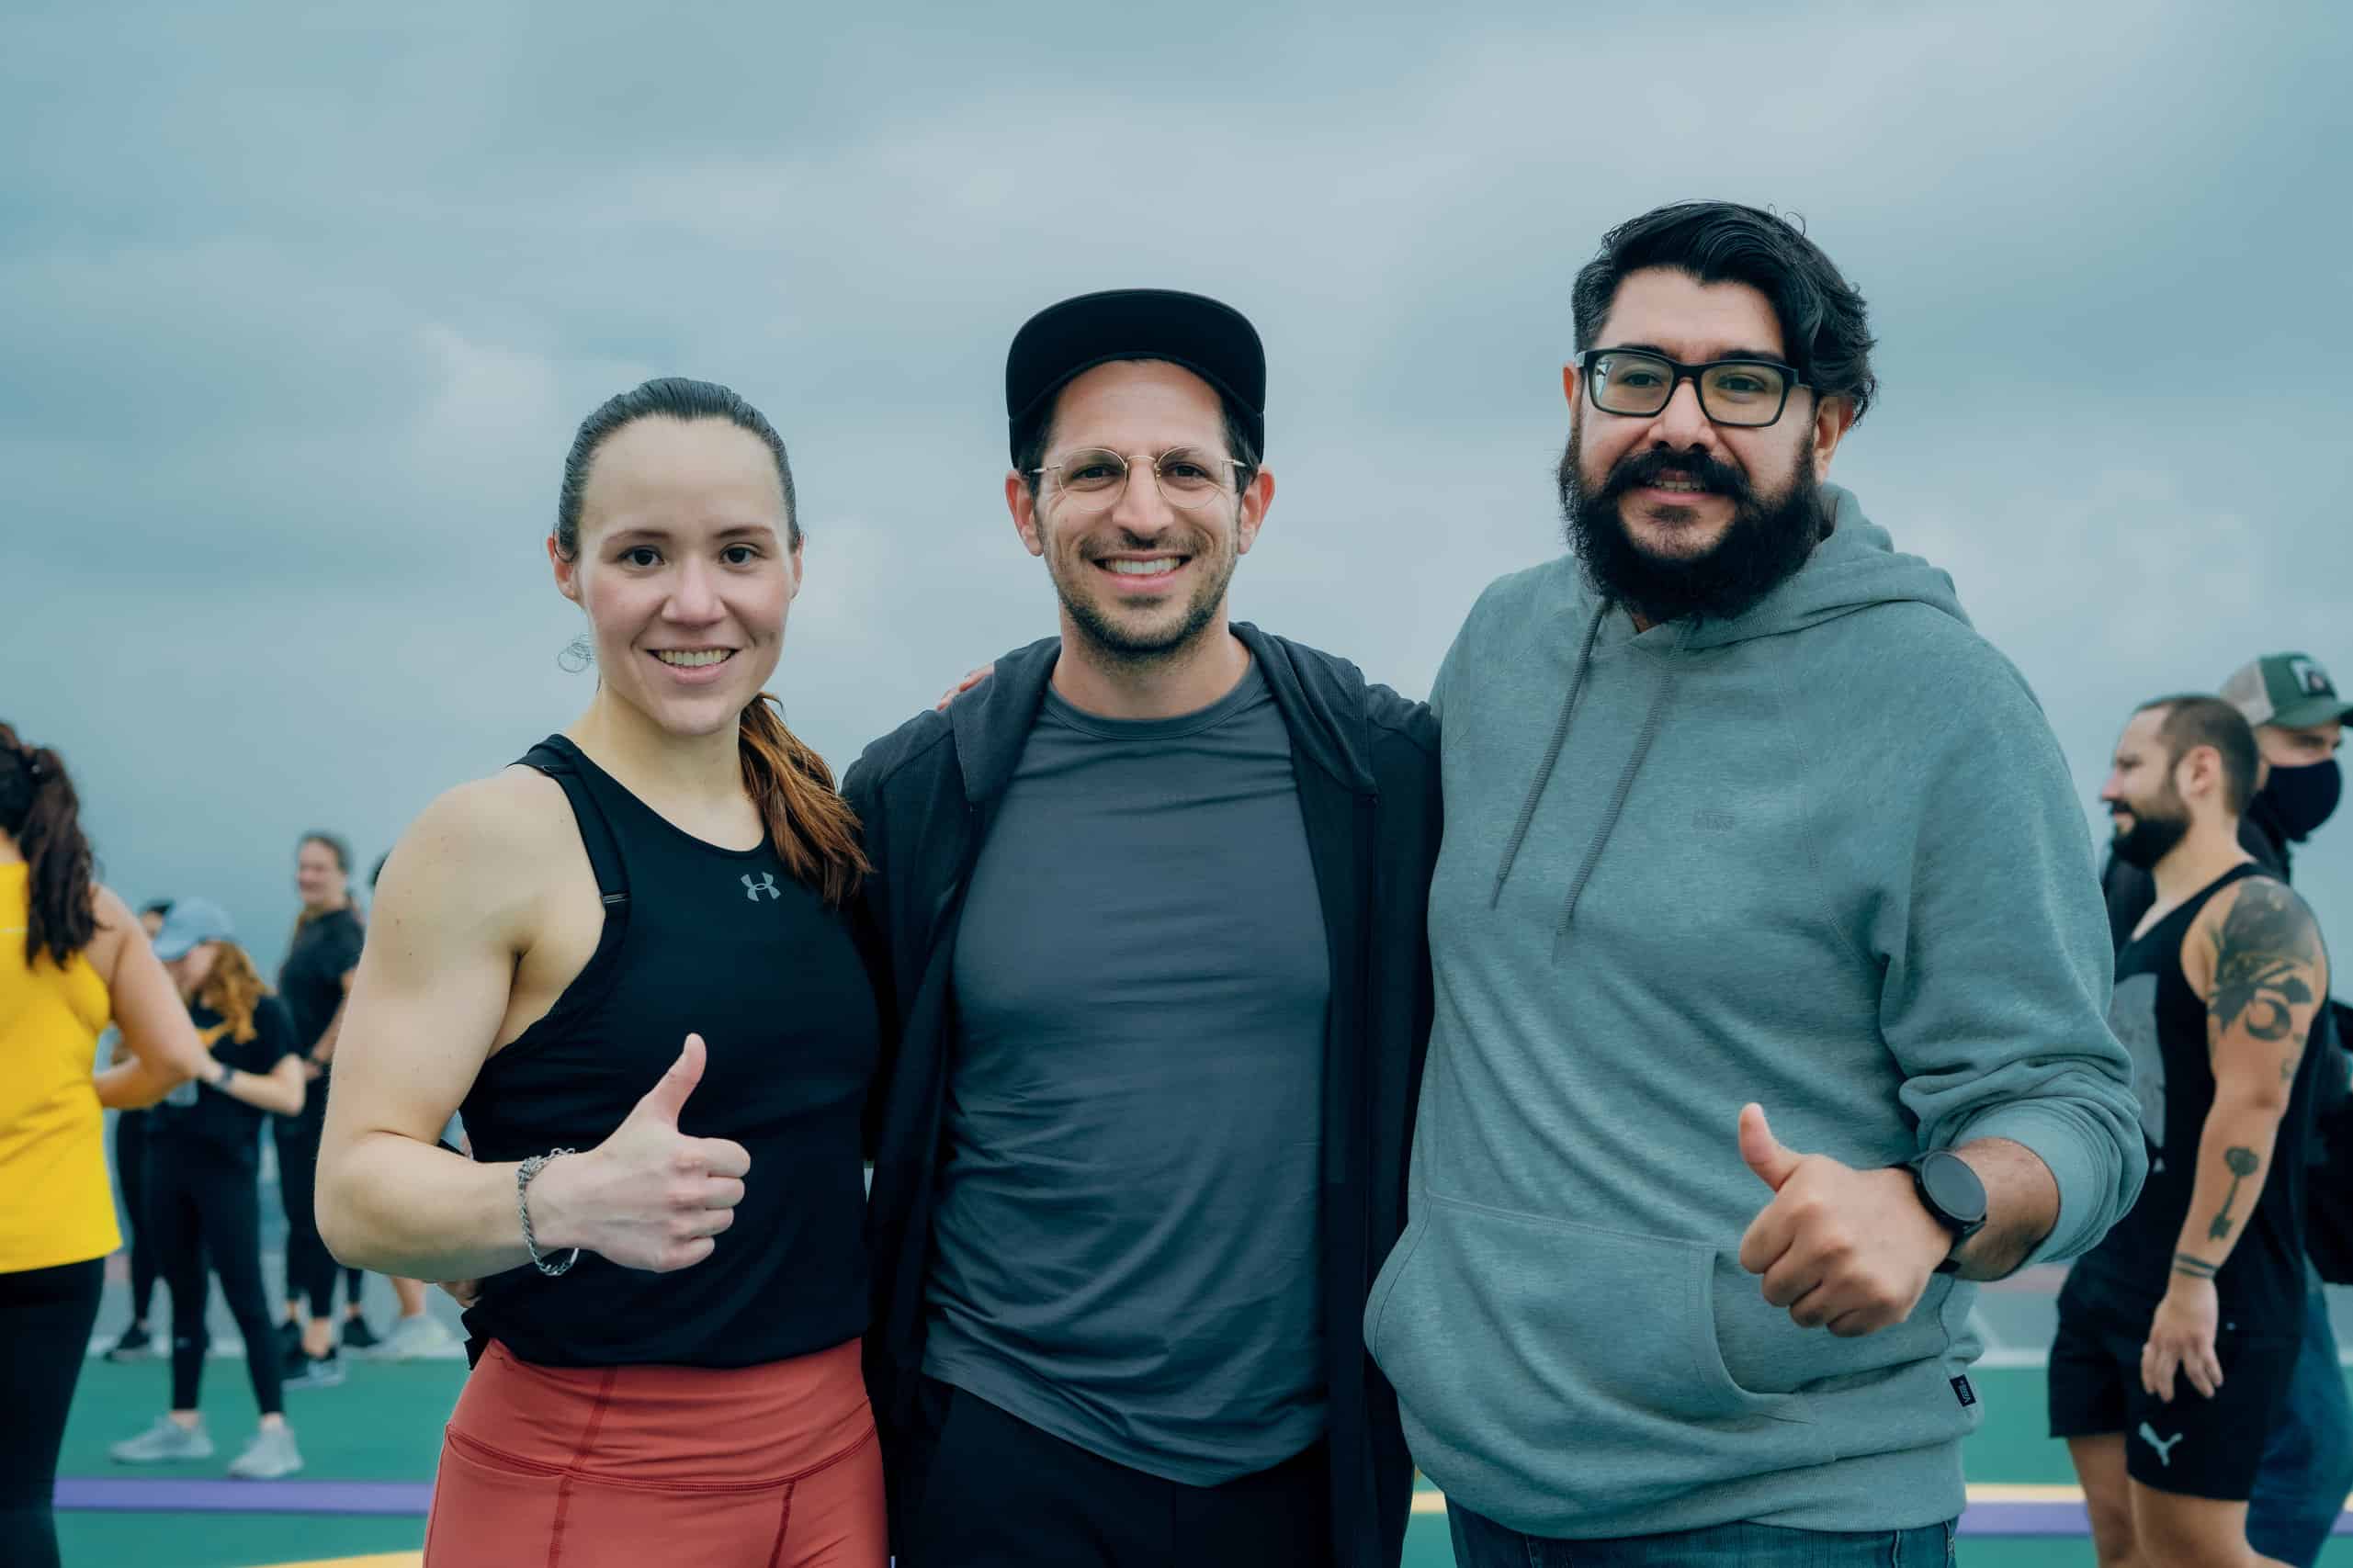 Fitness App Wos Raises Us$1.2 Million In Its First Round Of Investment